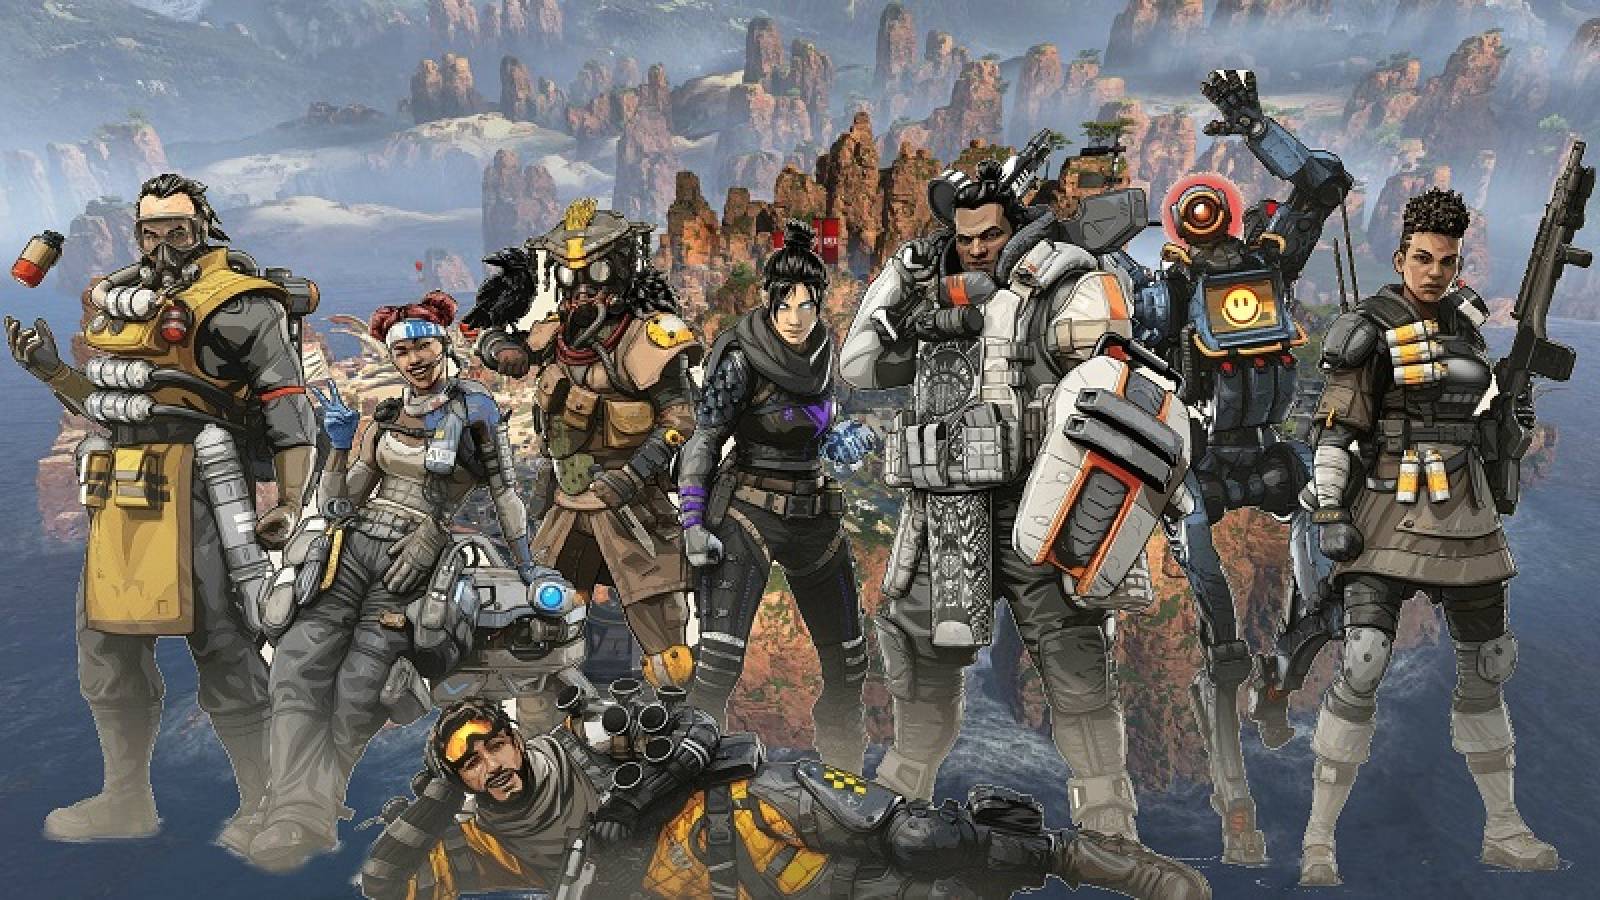 Apex Legends - When the cast voices all characters in the world of Anime and Video Games